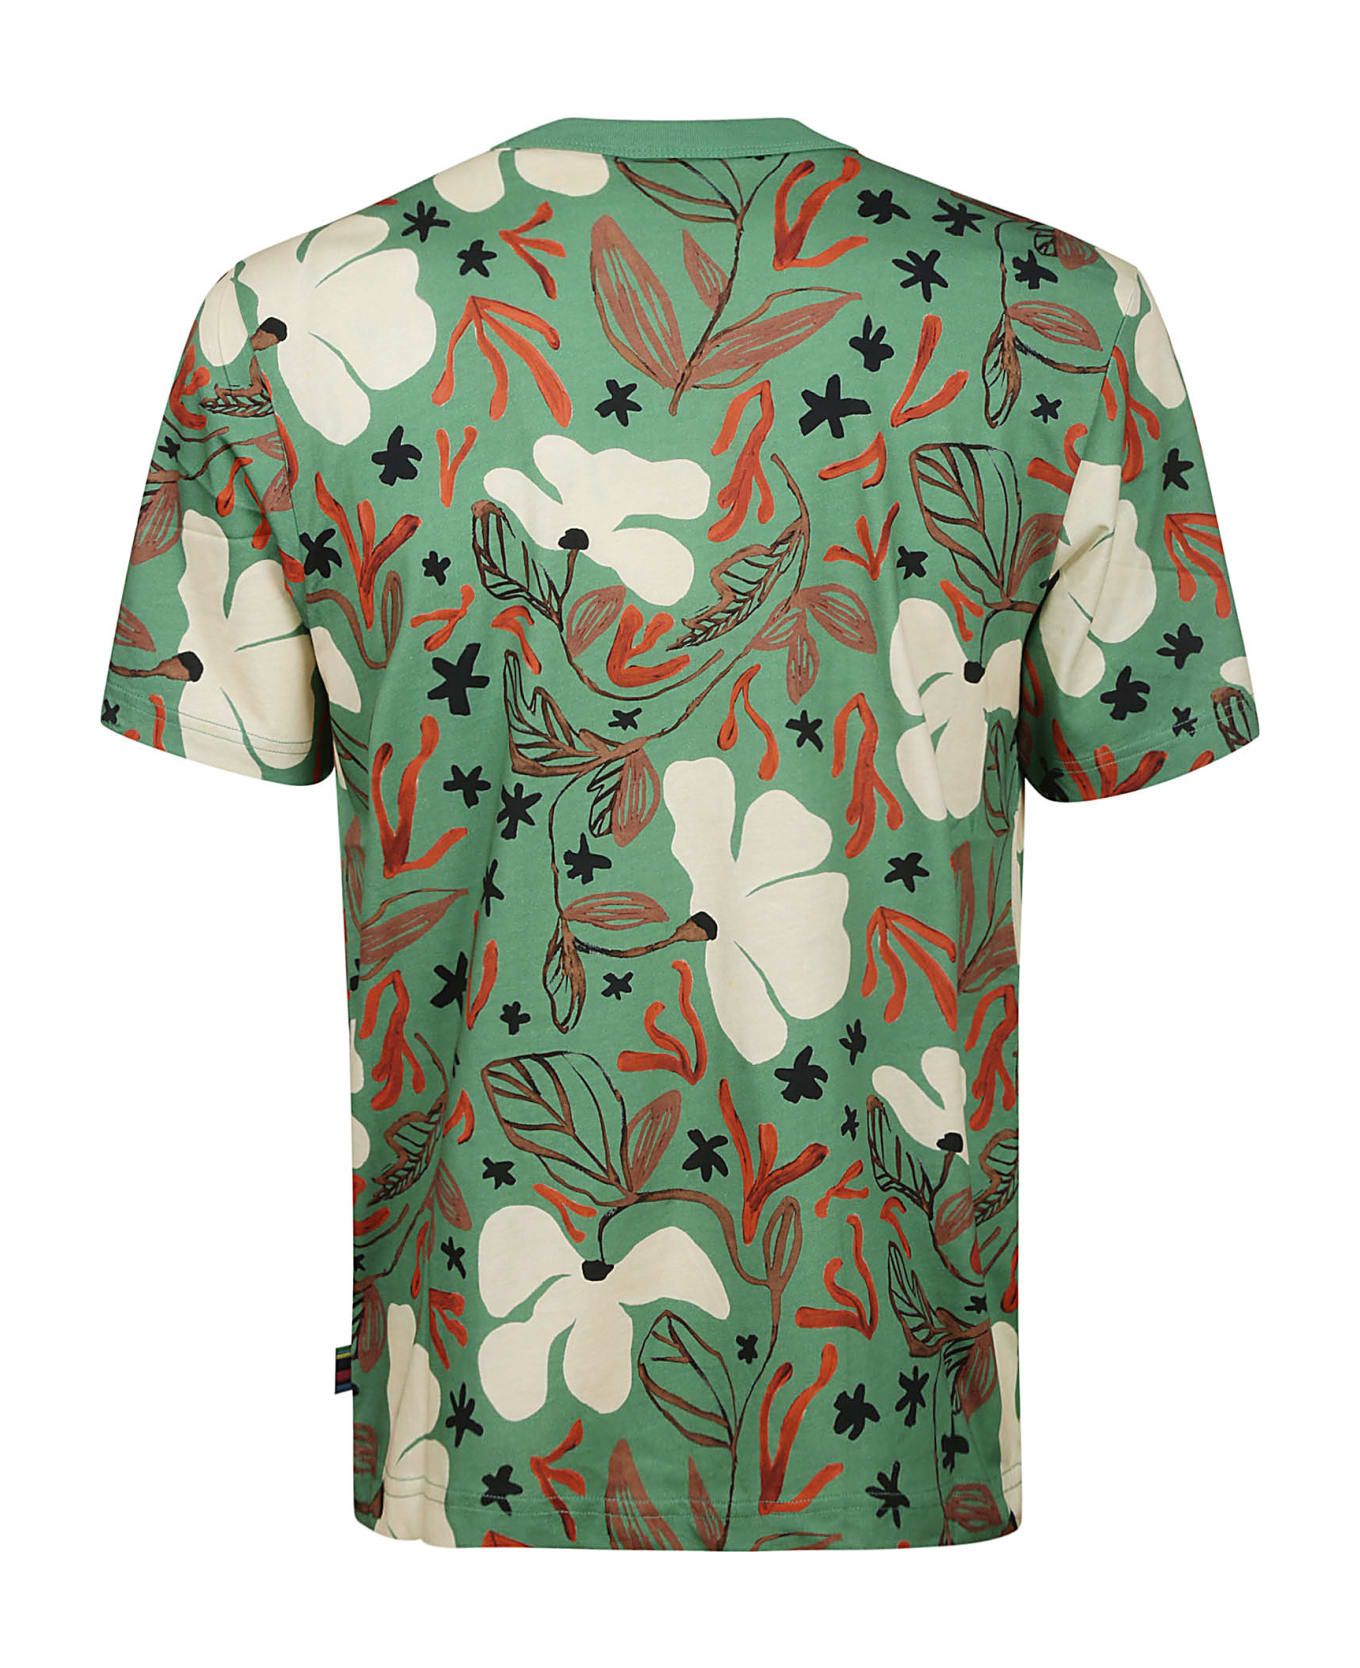 Paul Smith Ss T Shirt Sea Floral - Emerald Green